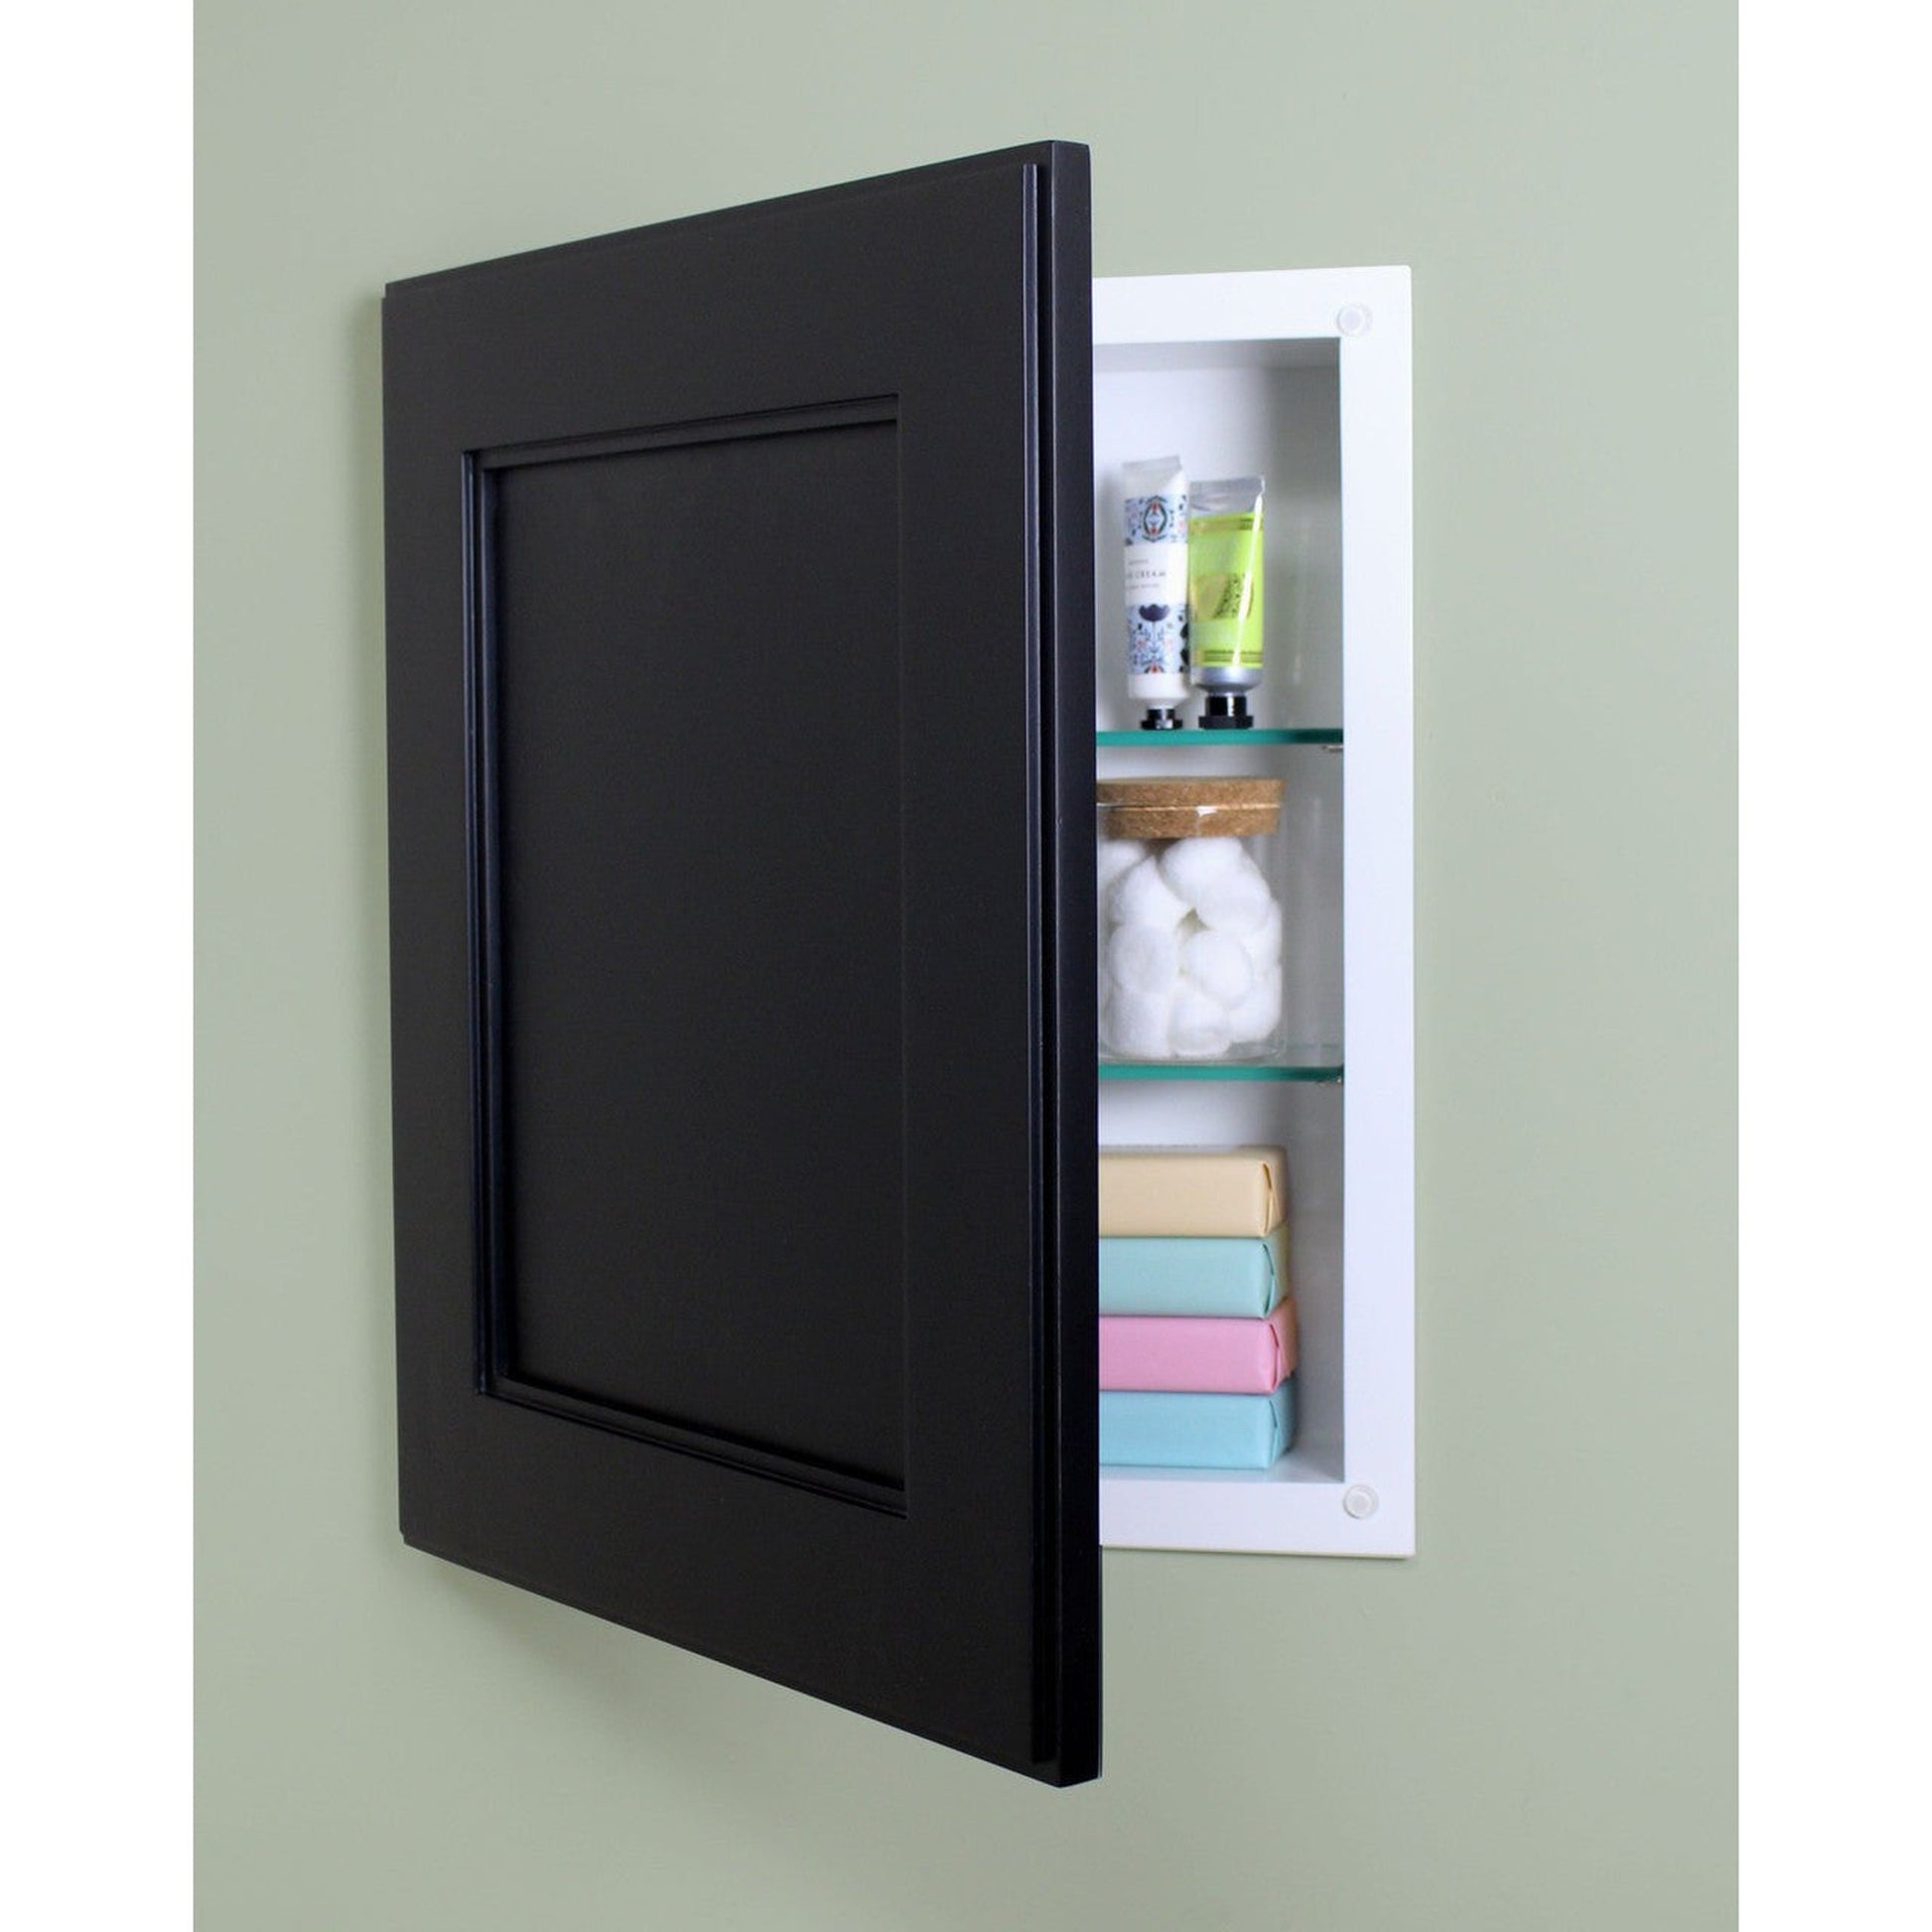 Fox Hollow Furnishings 14" x 18" Black Shaker Style Special 6" Depth White Interior Recessed Medicine Cabinet